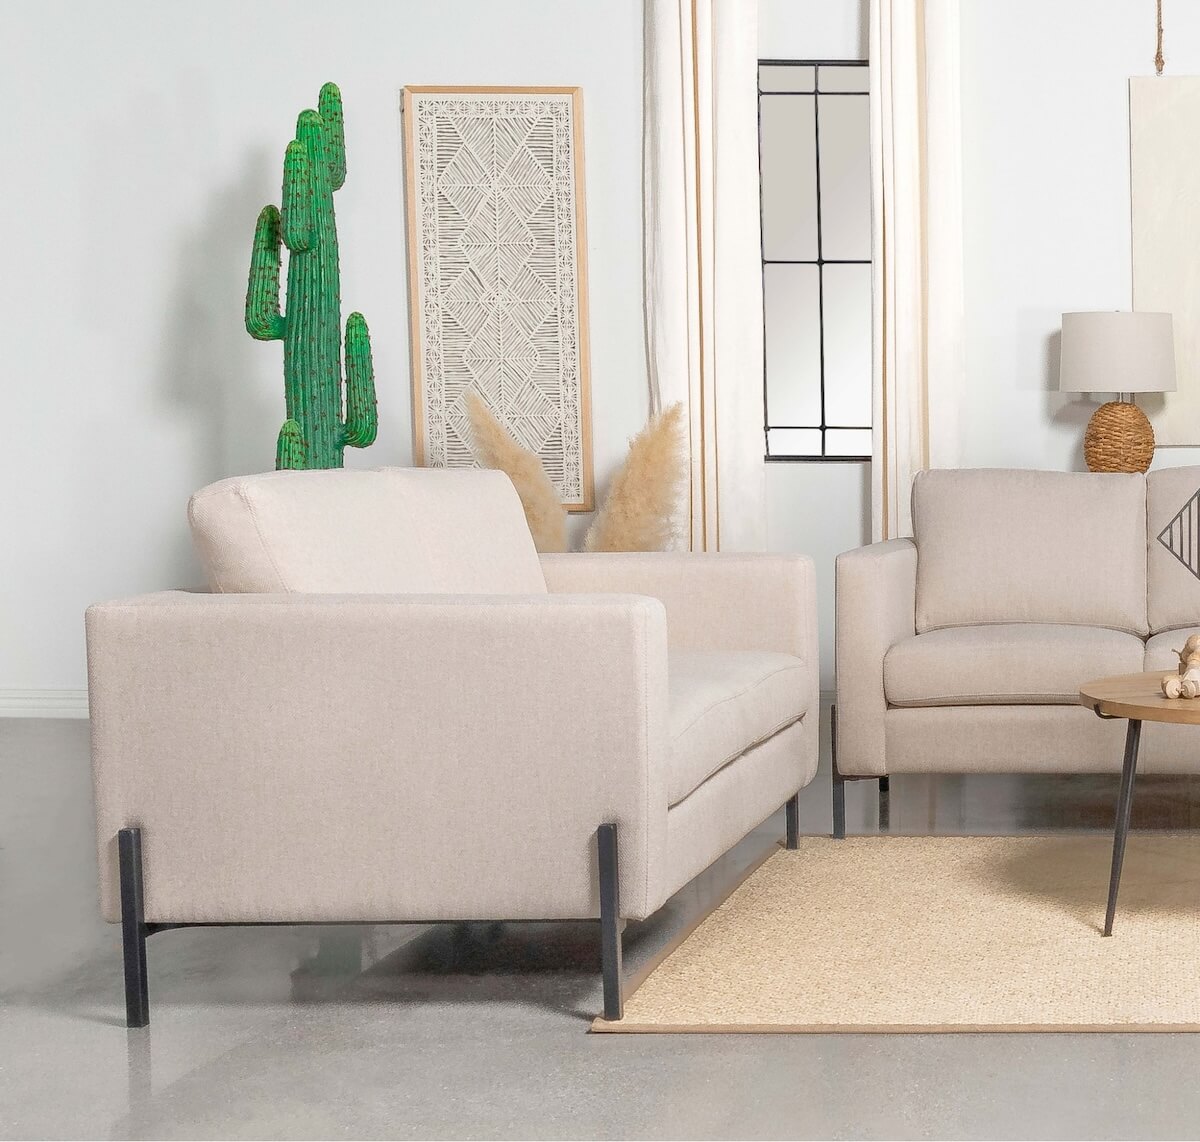 Small loveseat: Tilly Upholstered Track Arms Loveseat Oatmeal